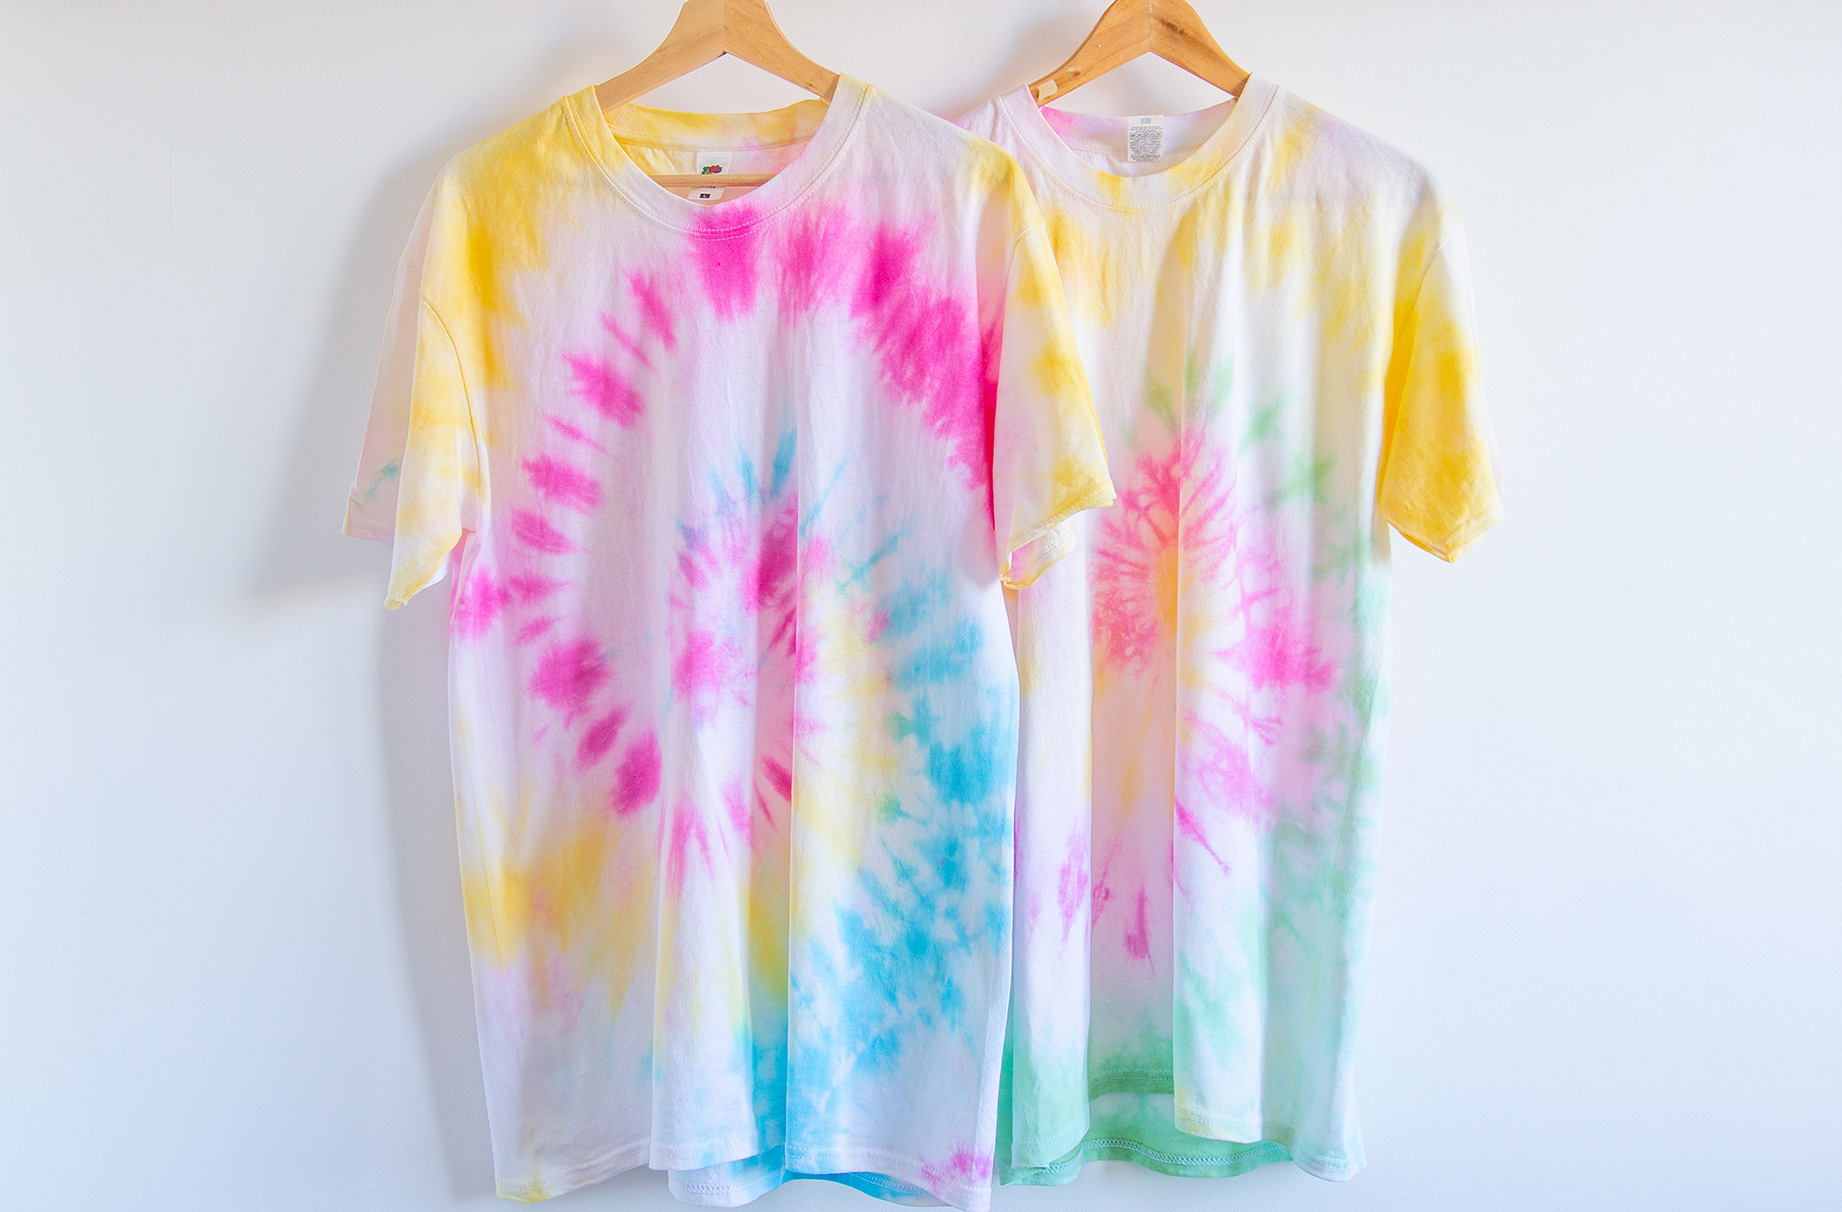 Homemade tie dye t-shirts with a spiral pattern.